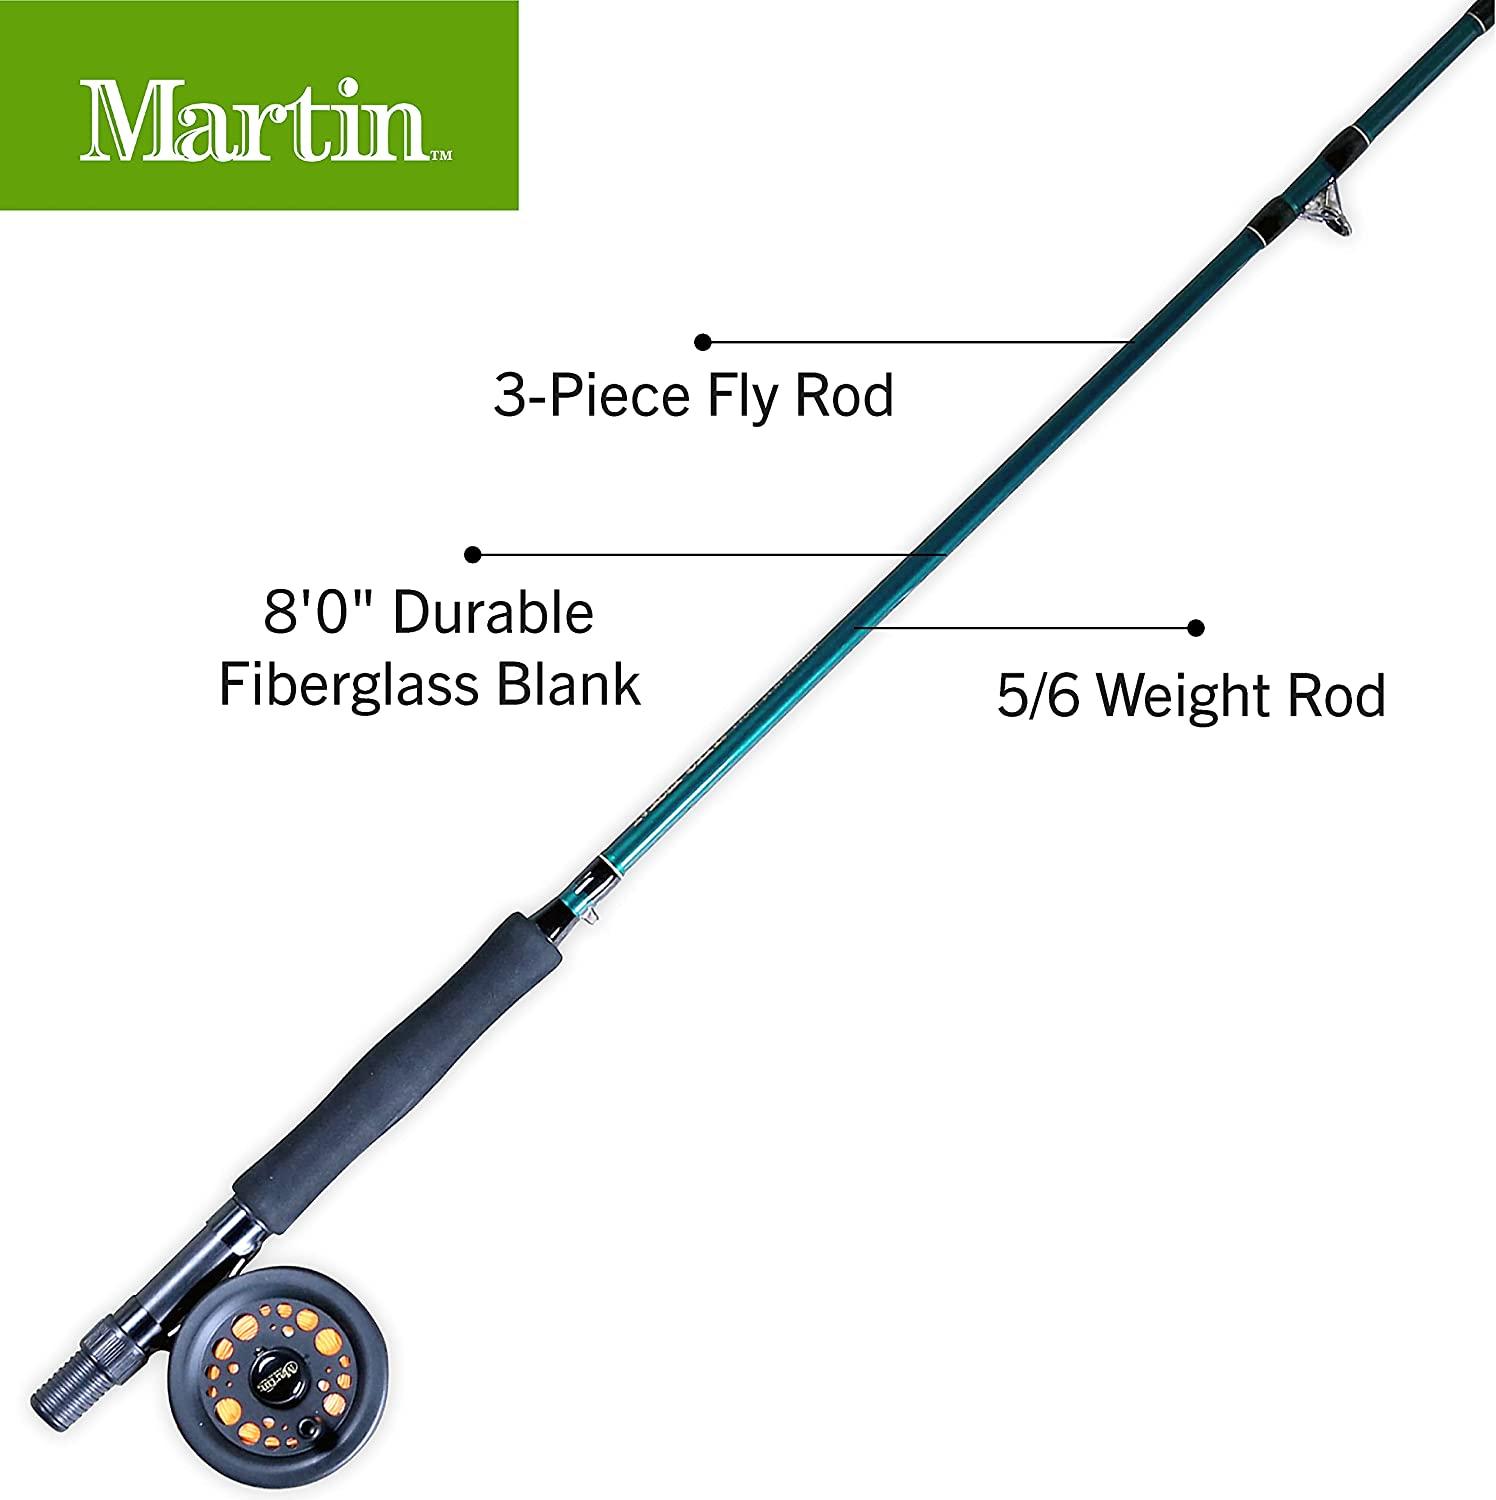 Martin Complete Fly Fishing Kit, 8-Foot 5/6-Weight 3-Piece Fly Fishing Pole,  Size 5/6 Rim-Control Reel, Pre-spooled with Backing, Line and Leader, Includes  Custom Fly Tackle Assortment, Brown/Green